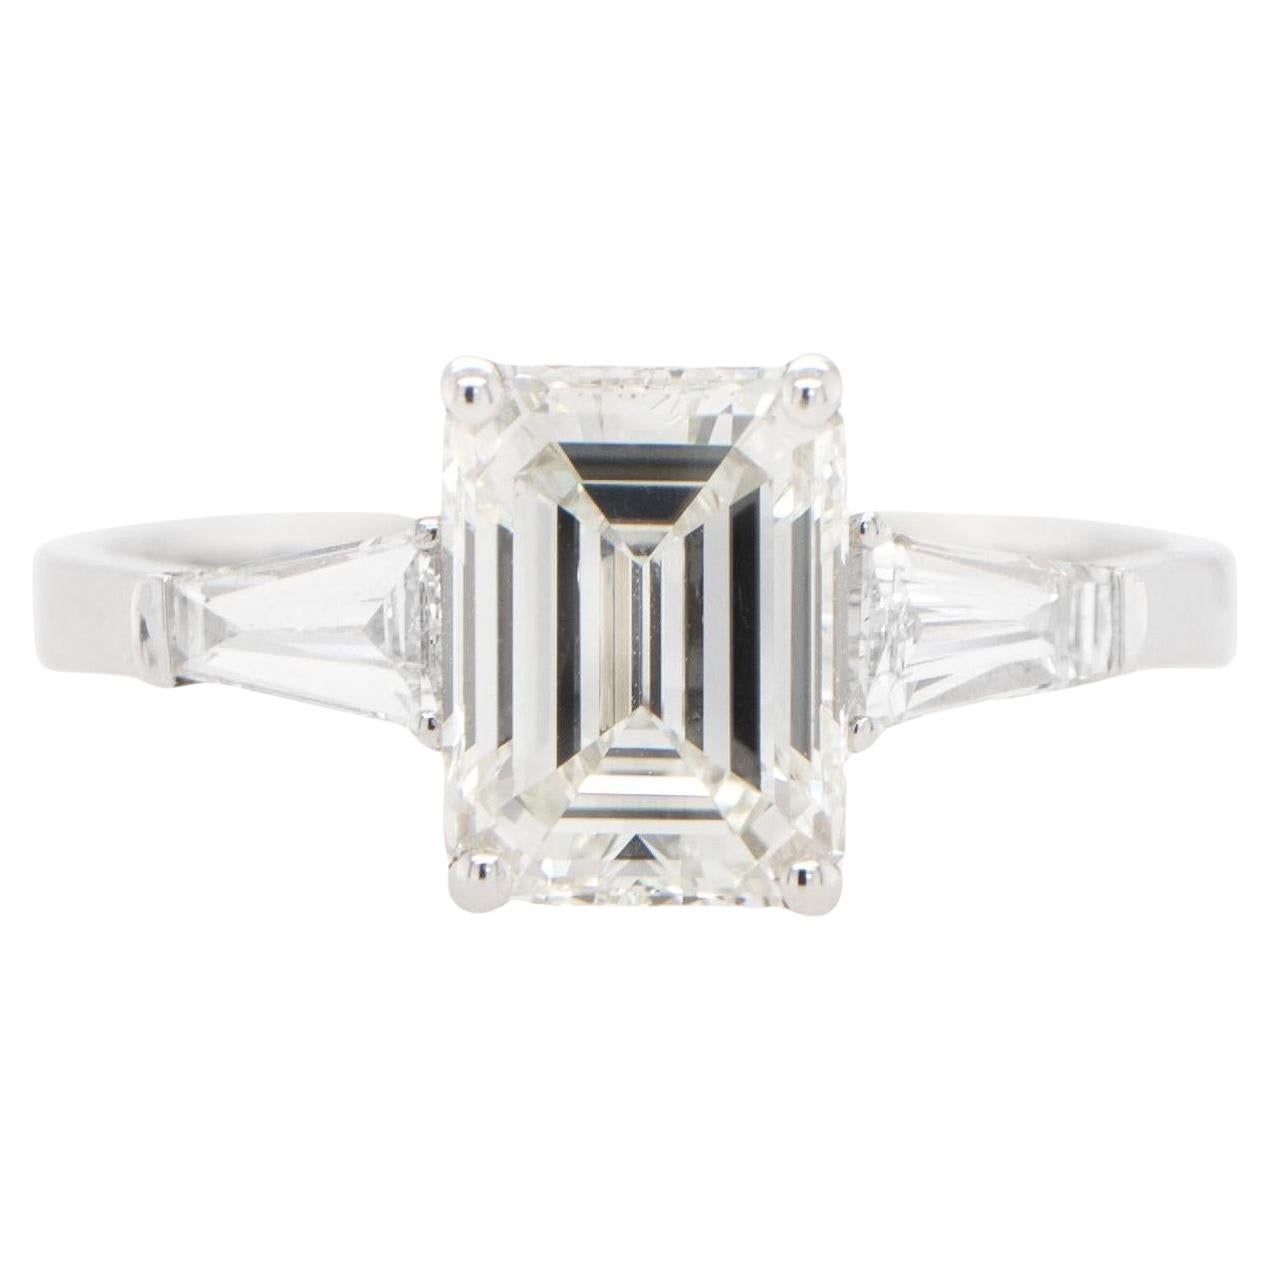 GIA Certified Emerald Cut Diamond Engagement Ring 1.82 Carats 18K Gold For Sale